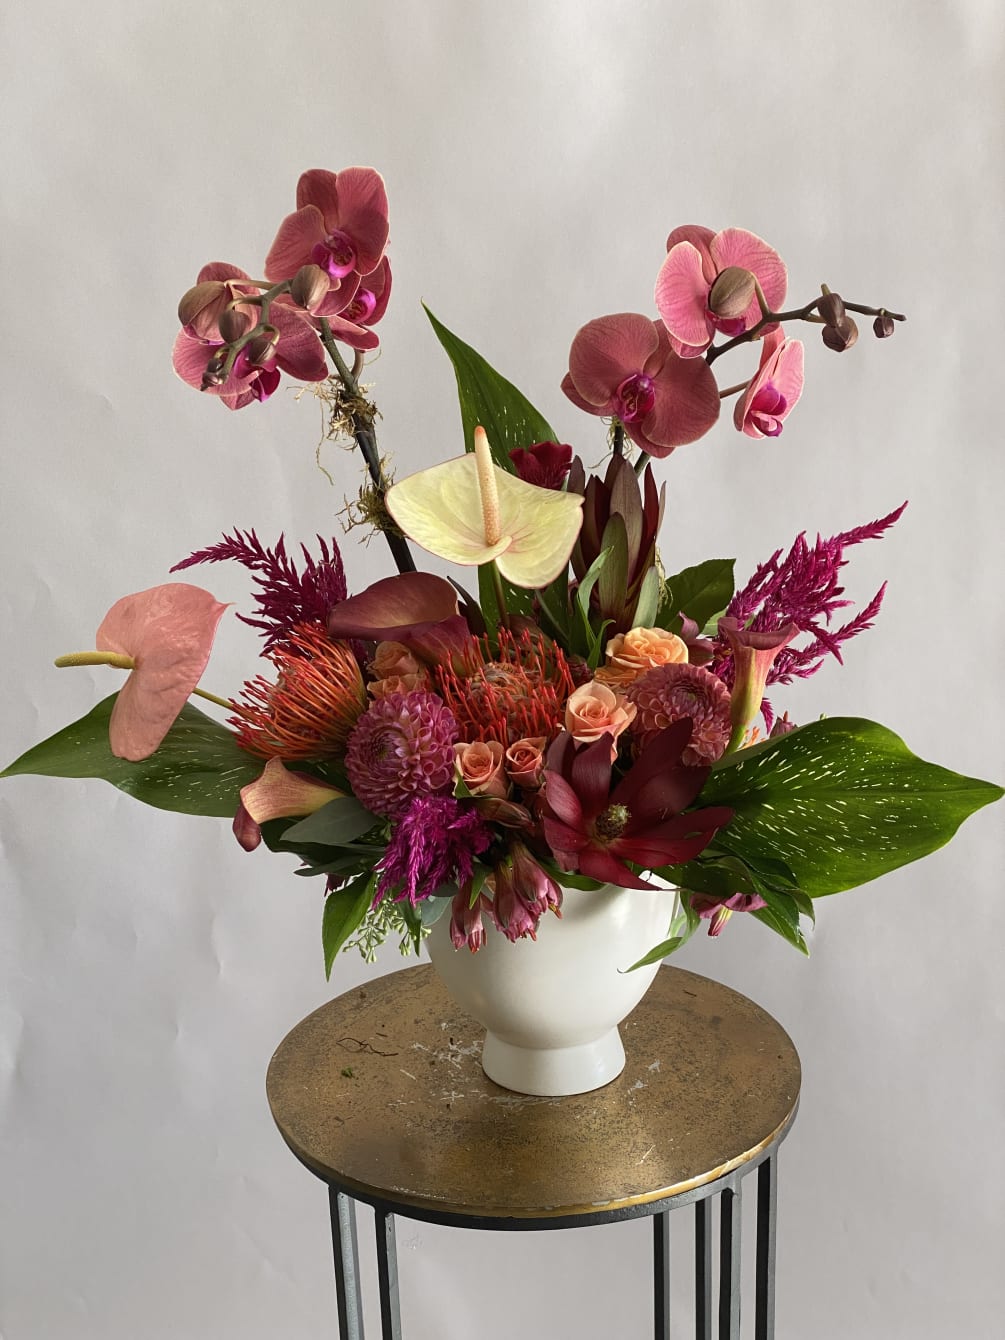 This tall showstopper features so many wonderful tropical blooms. Arrangement might change